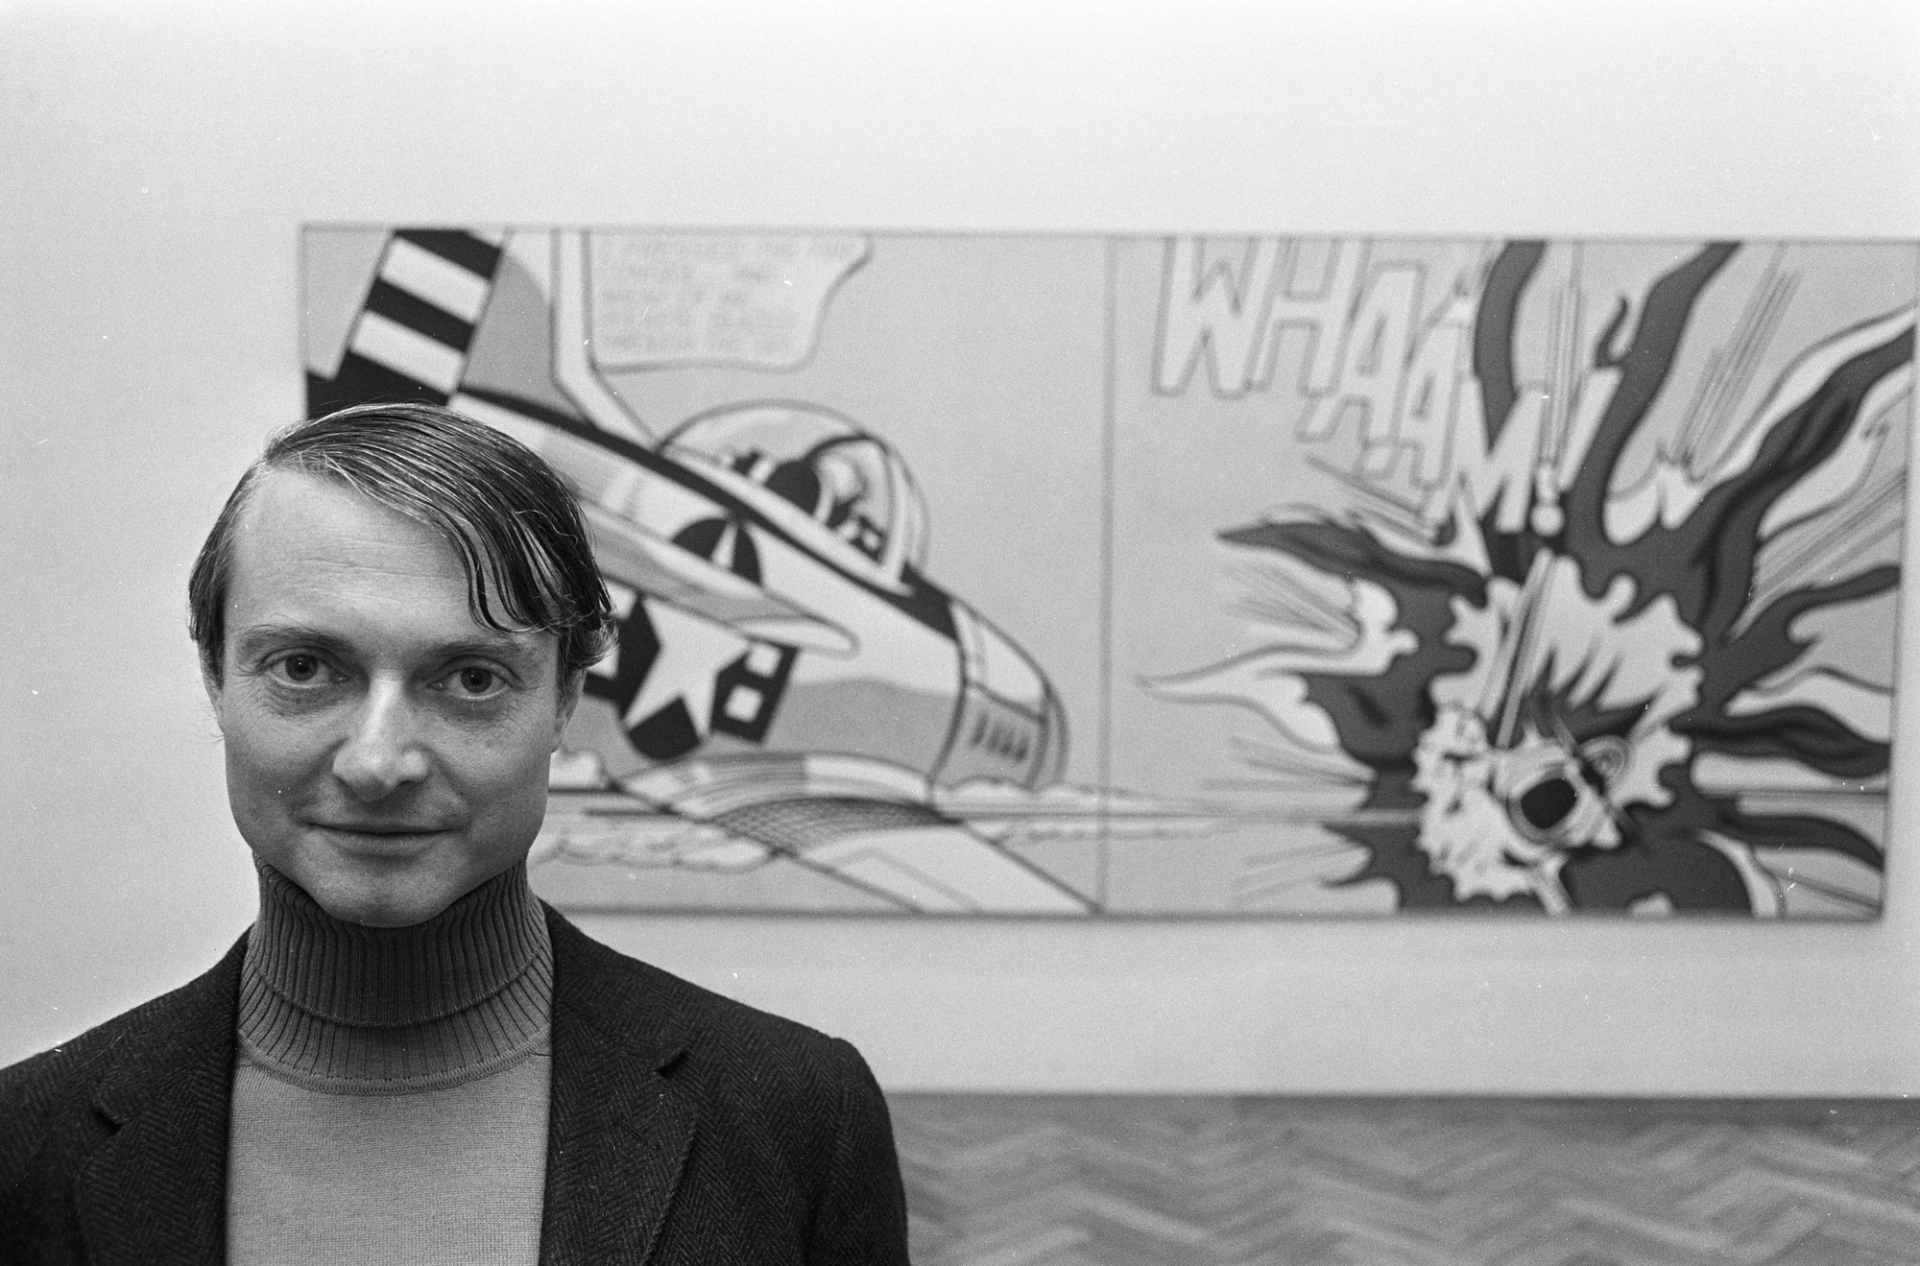 A monochrome portrait of Roy Lichtenstein, wearing a suit and standing in front of his iconic work Whaam!